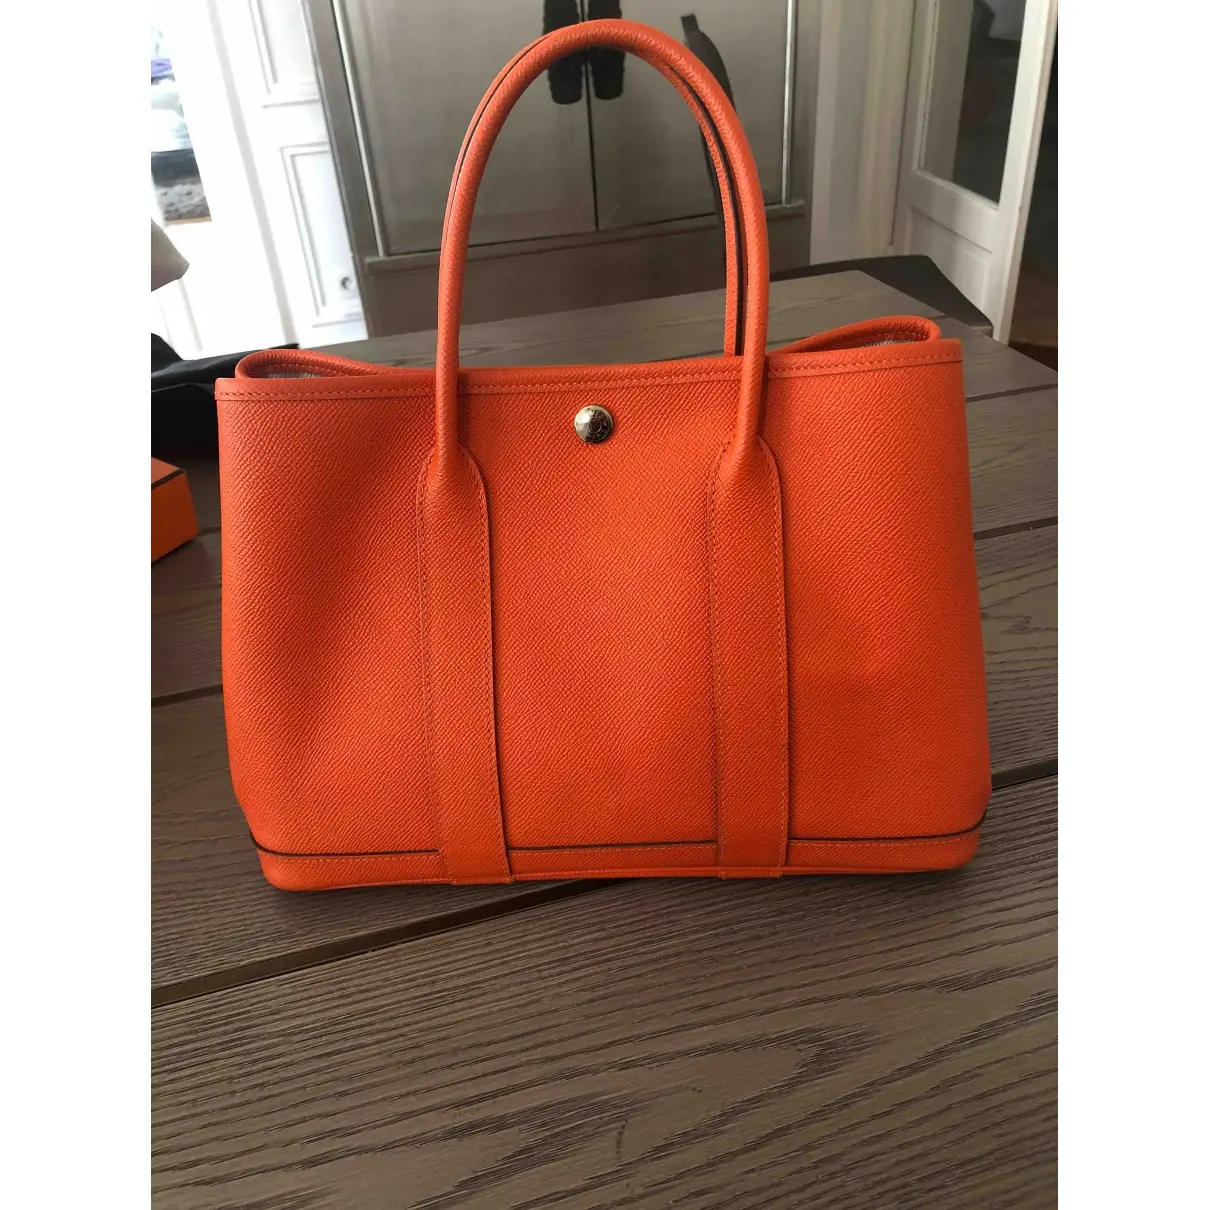 Hermès Garden Party leather tote for sale